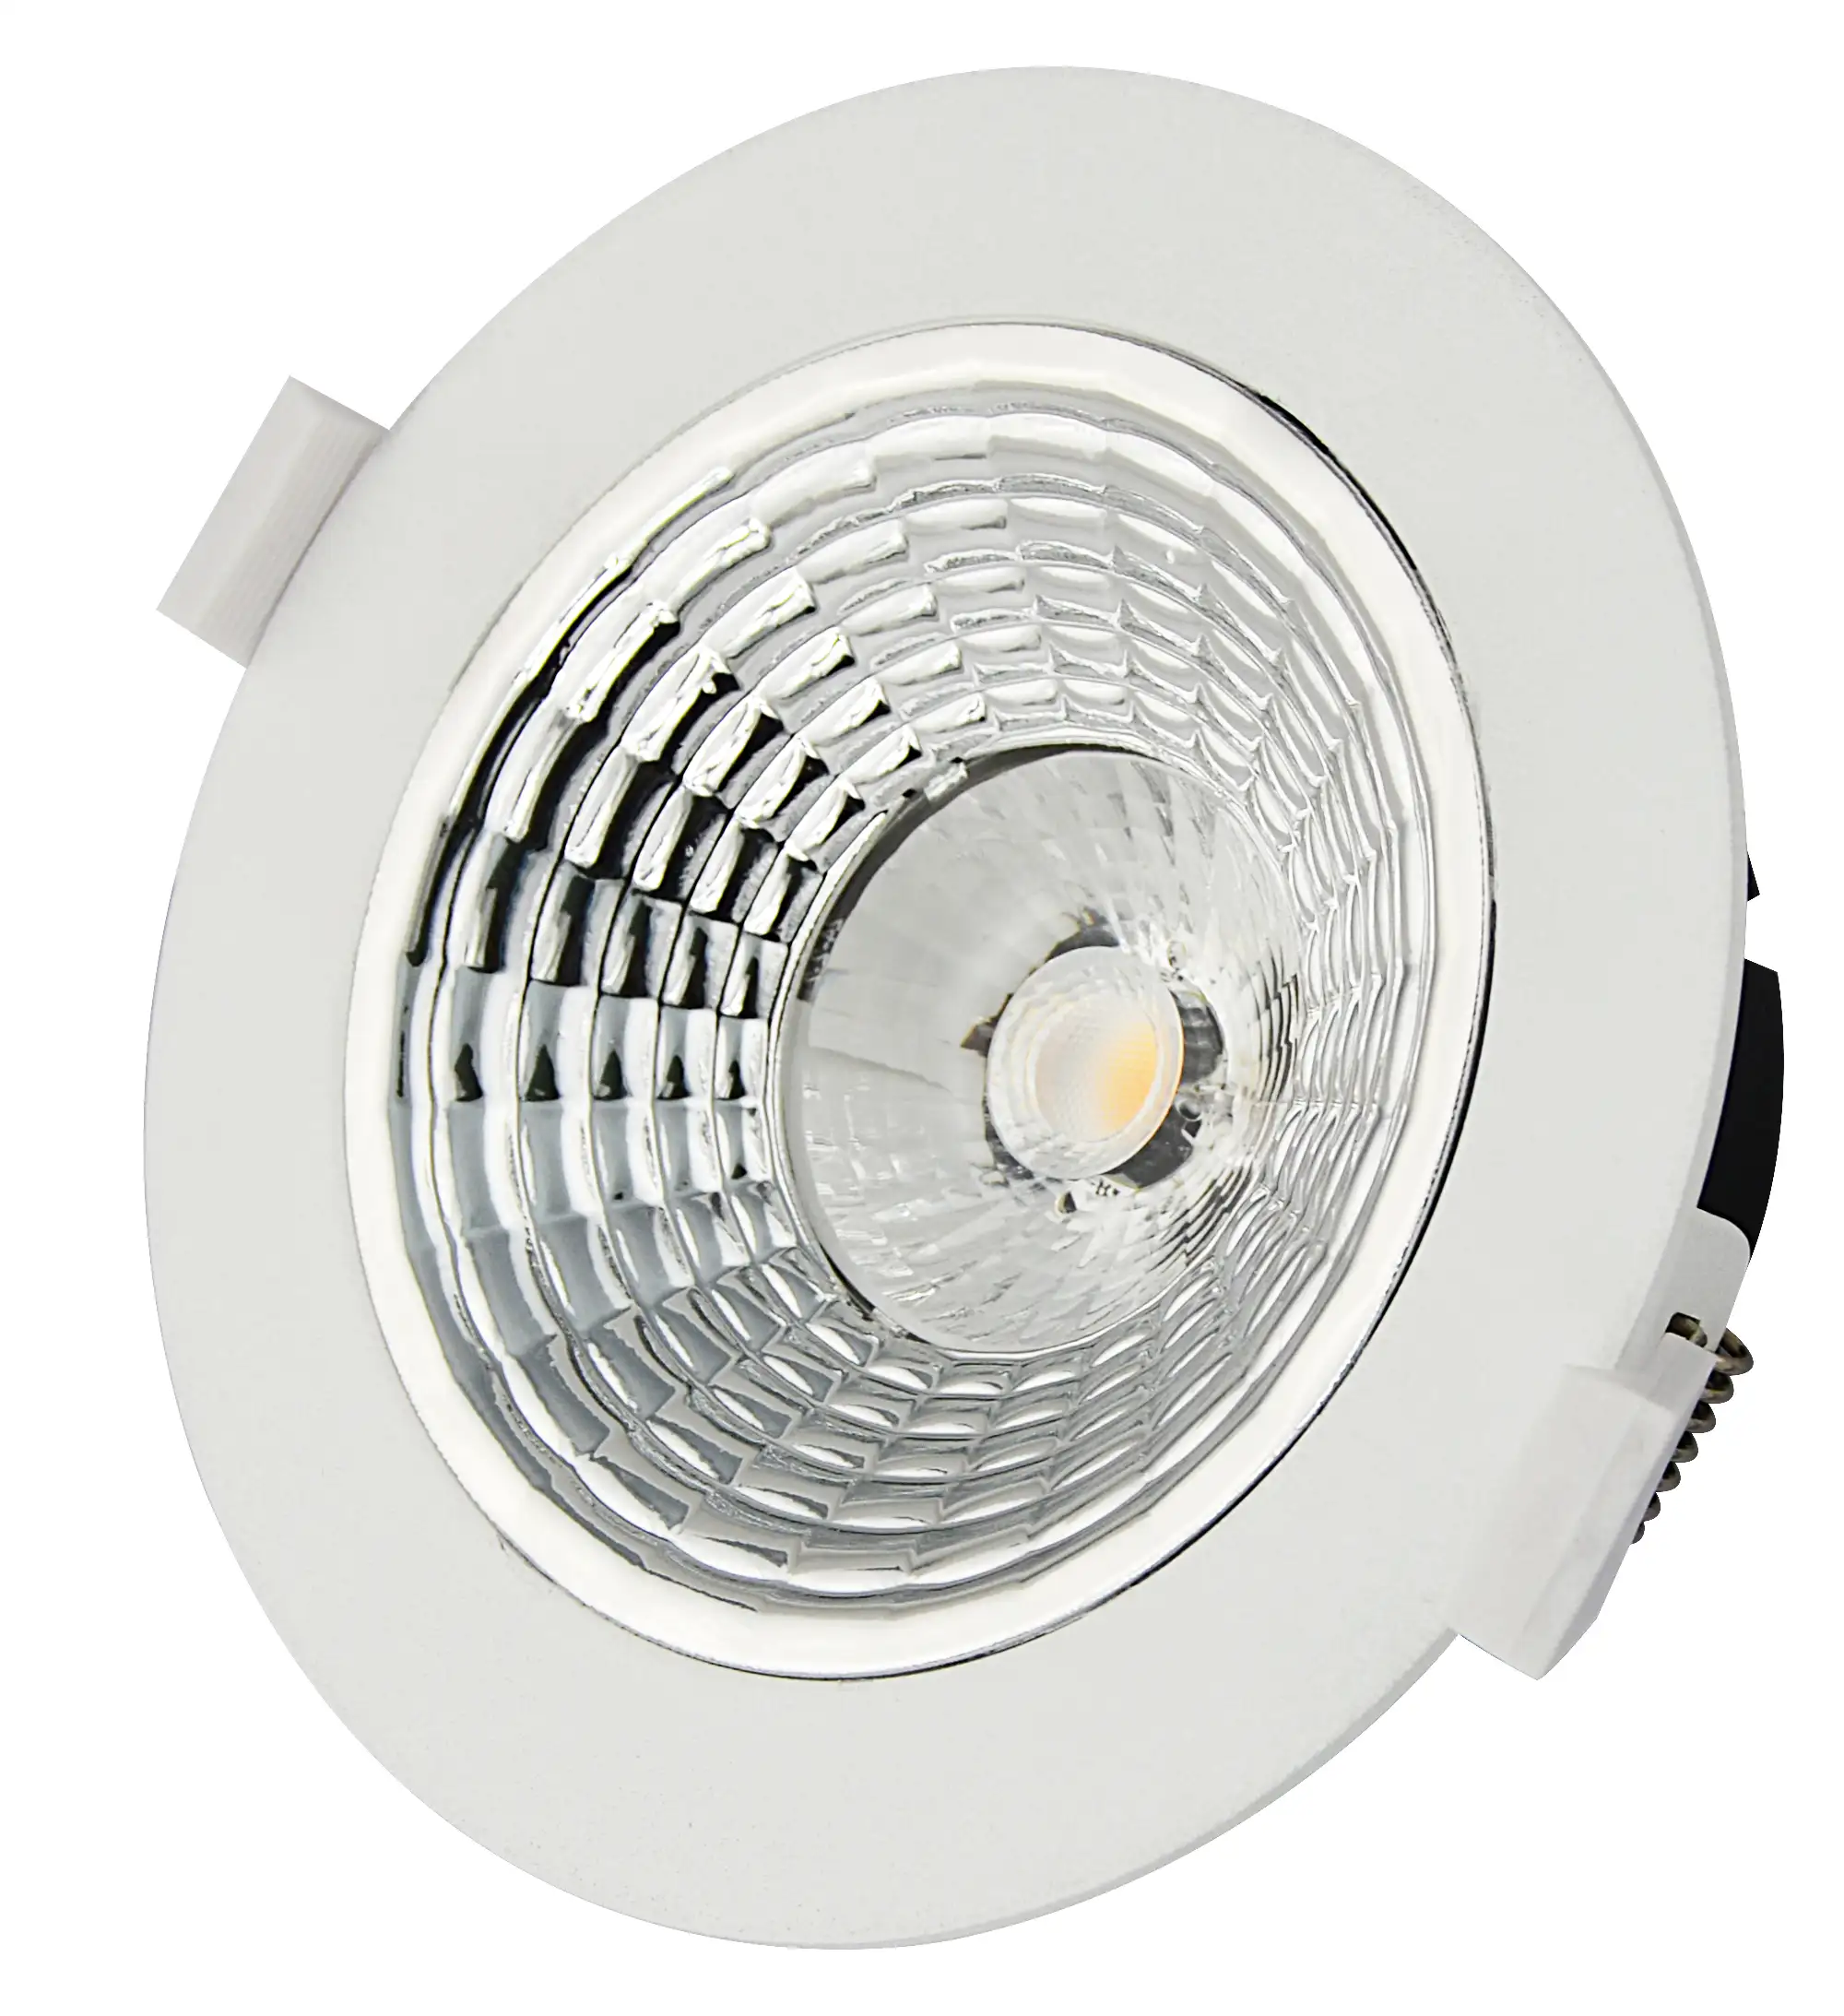 Dimmable very thin anti glare 6 inch 22W 2100lm special gradient reflector fire rated led downlight even lighting without spot